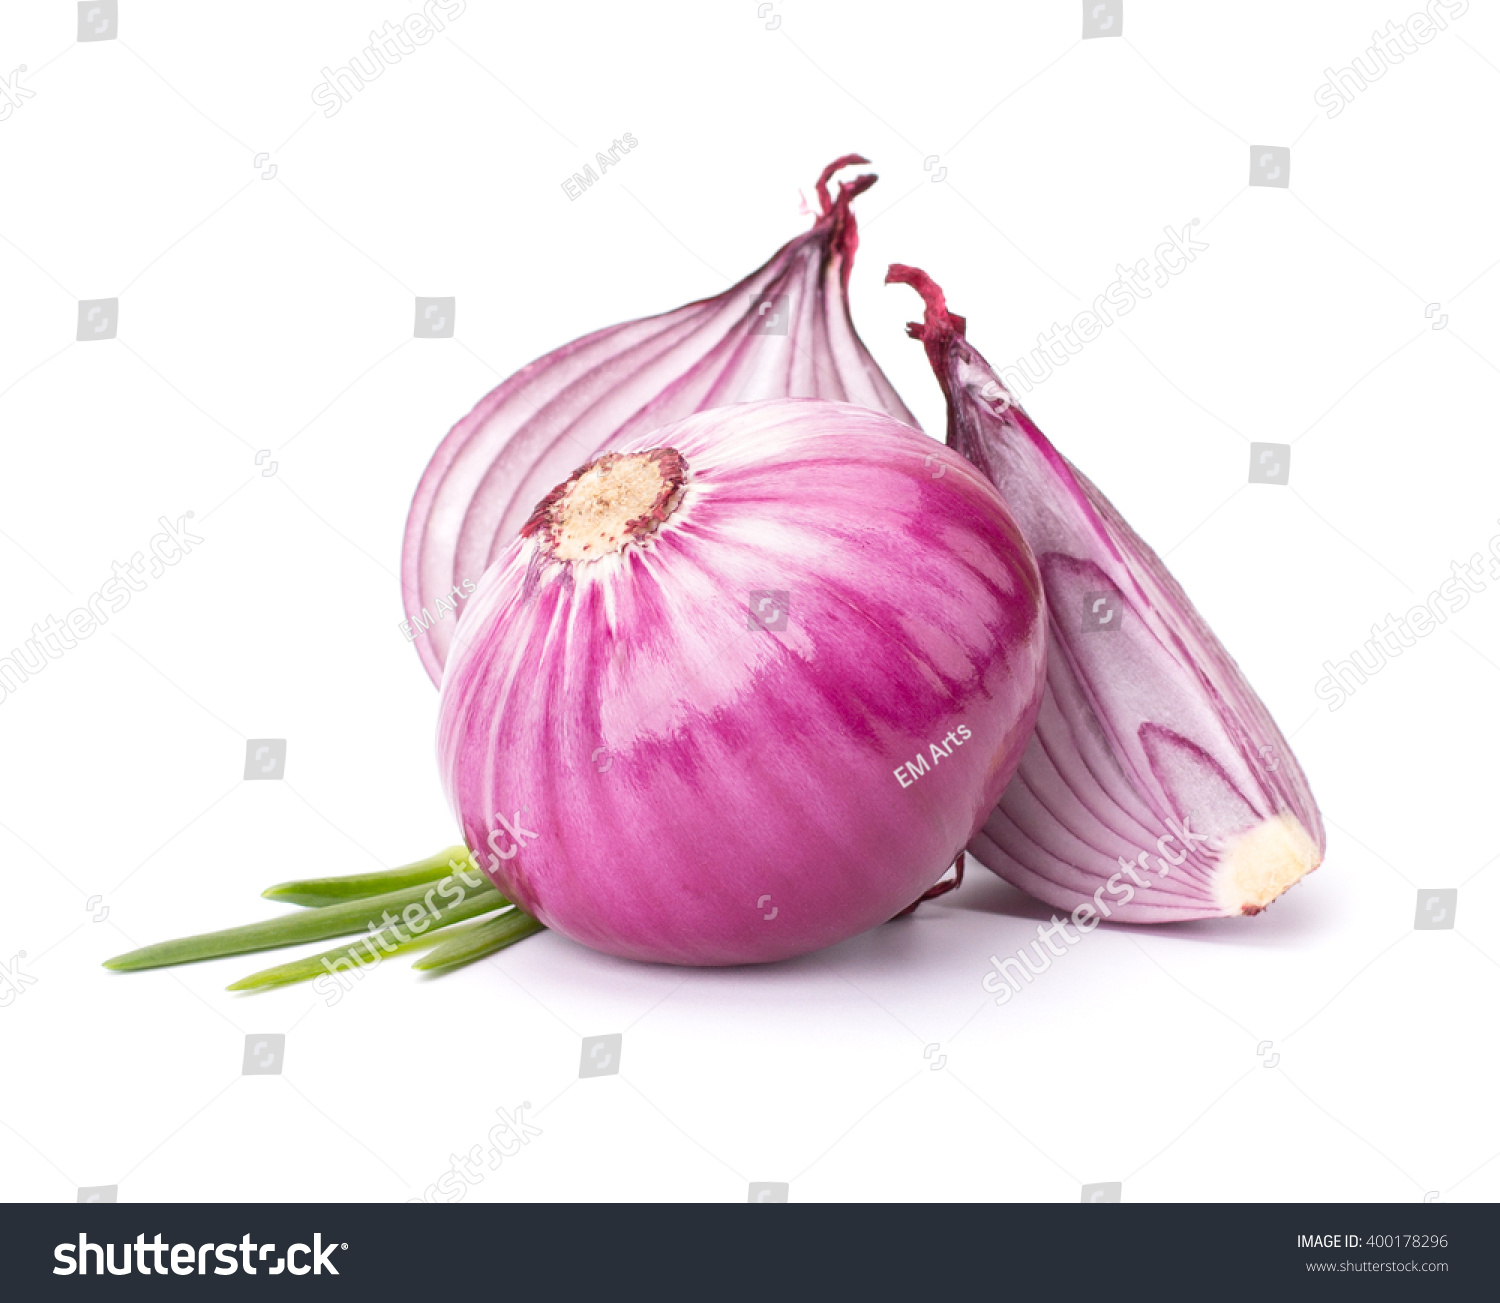 Red Onion Cut Halves Spring Green Stock Photo 400178296 - Shutterstock